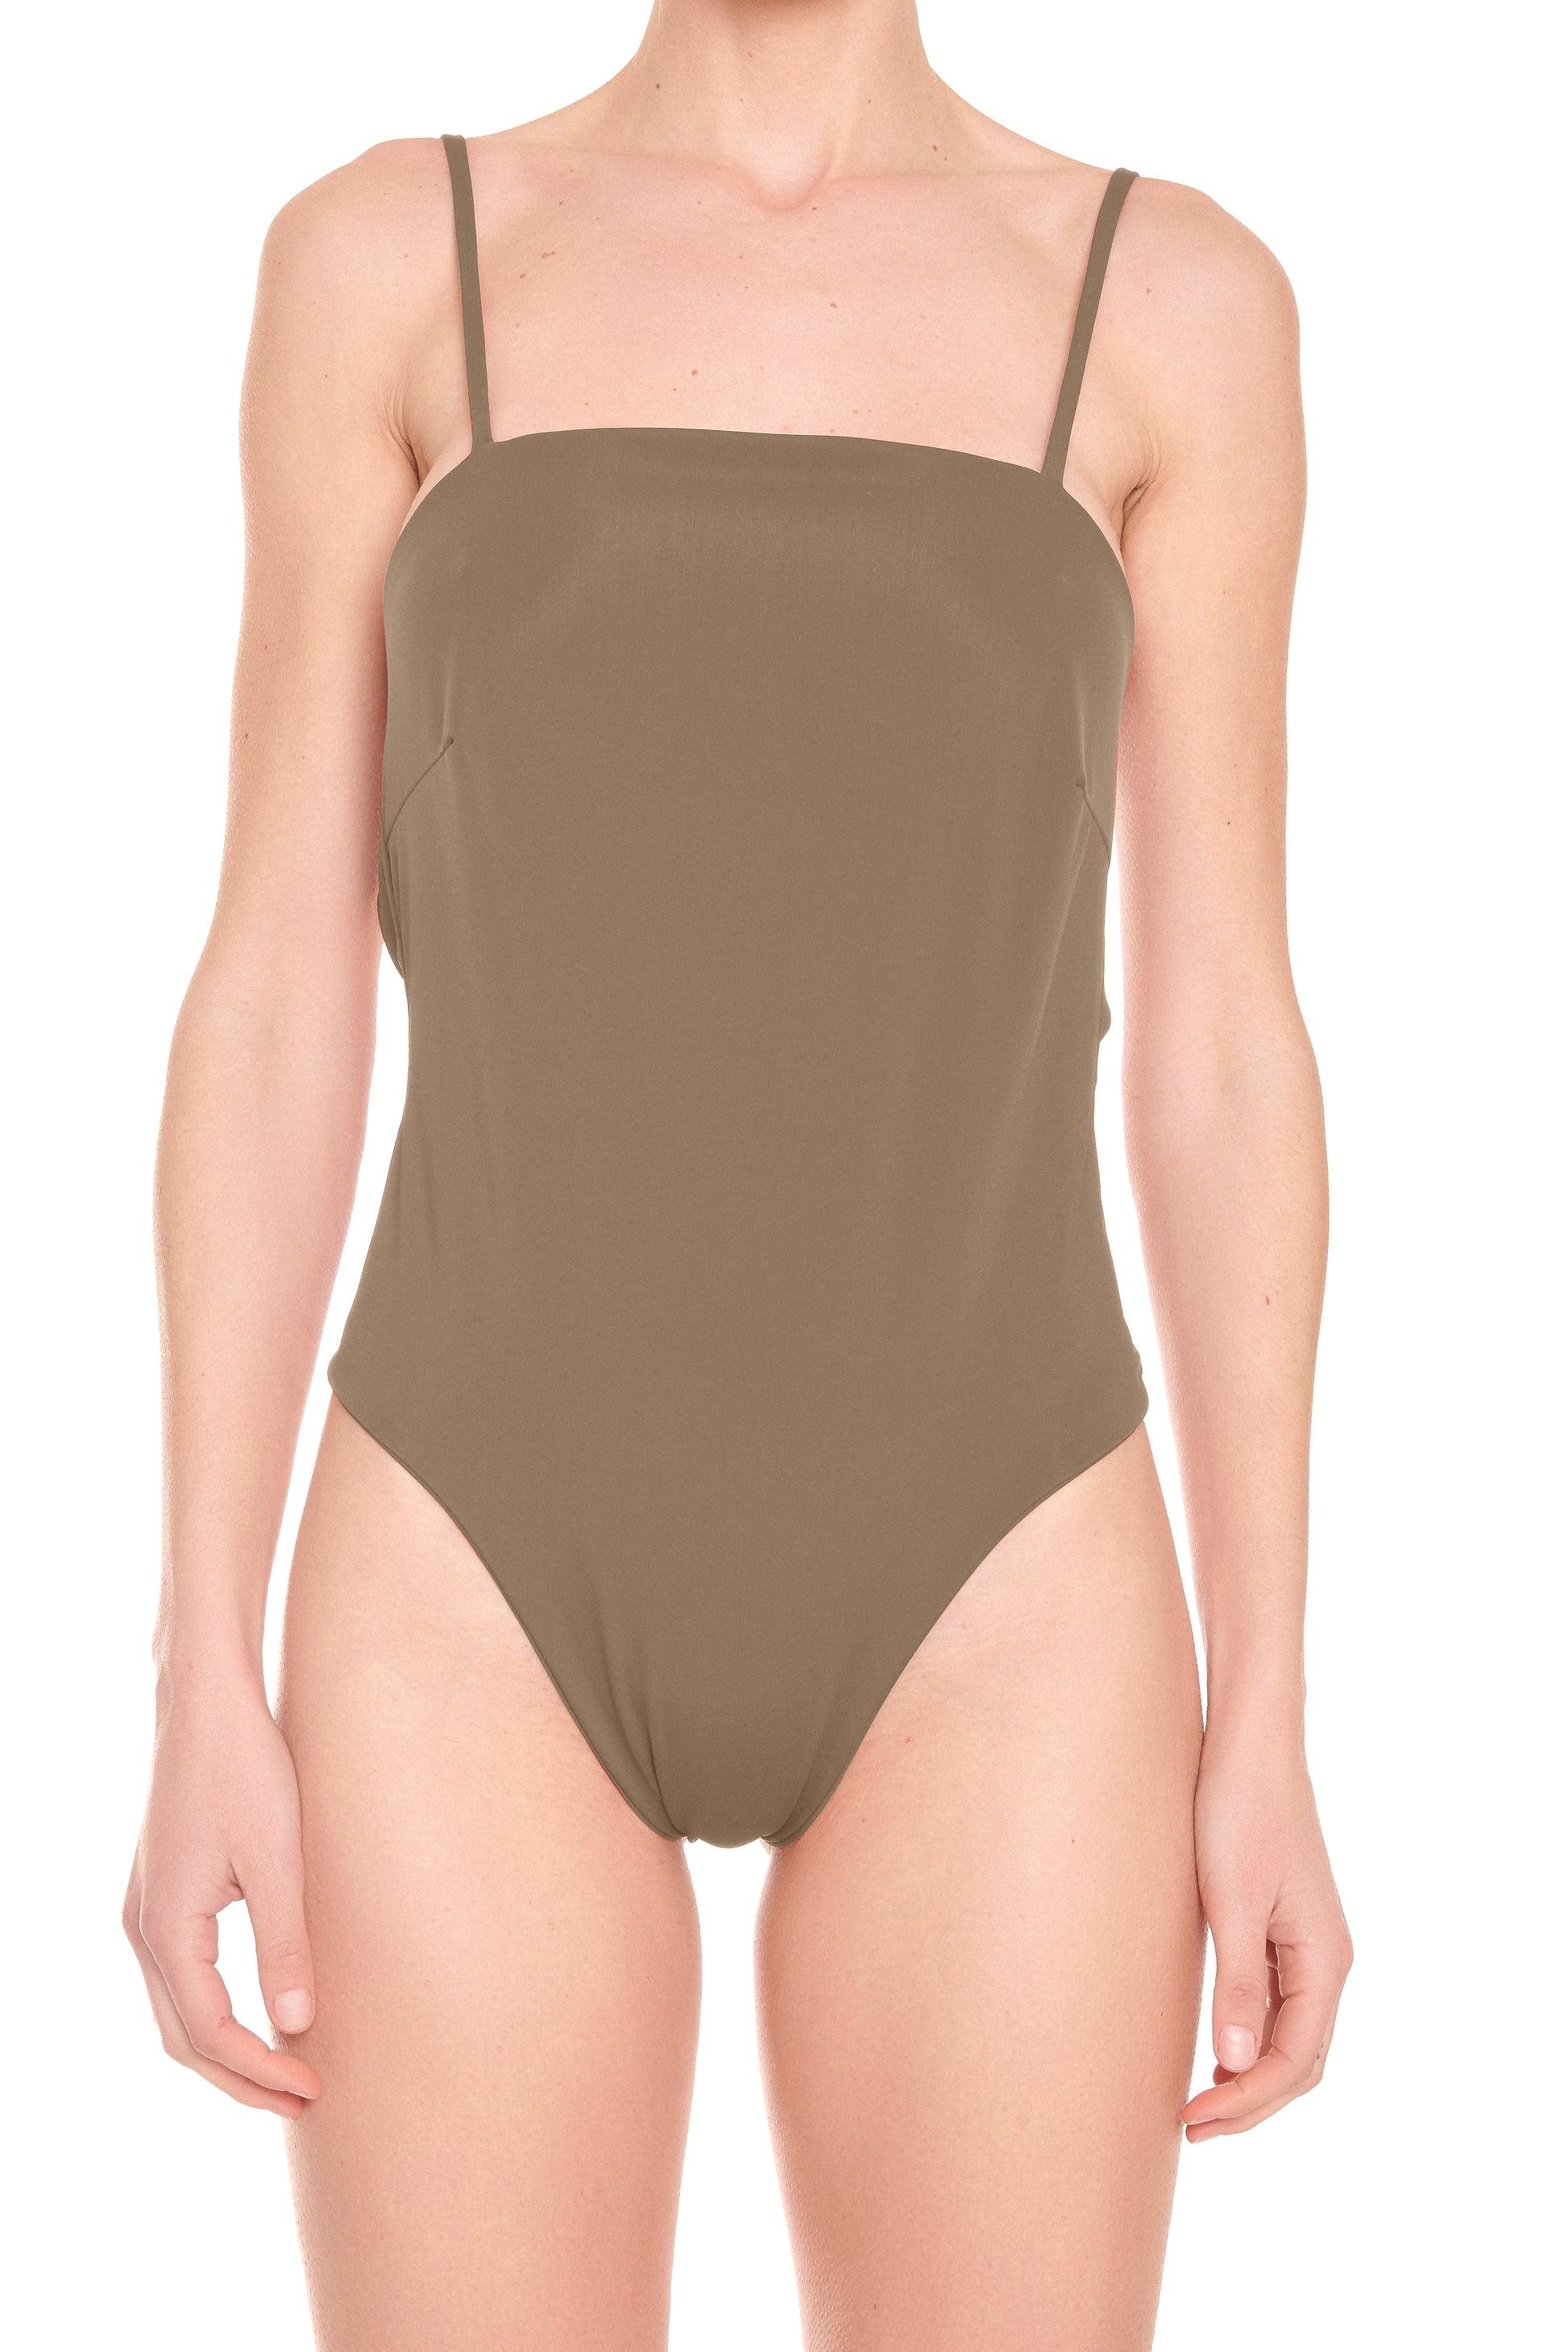 Stylish Bonaire One-Piece Swimsuit for Pool and Beachside Elegance